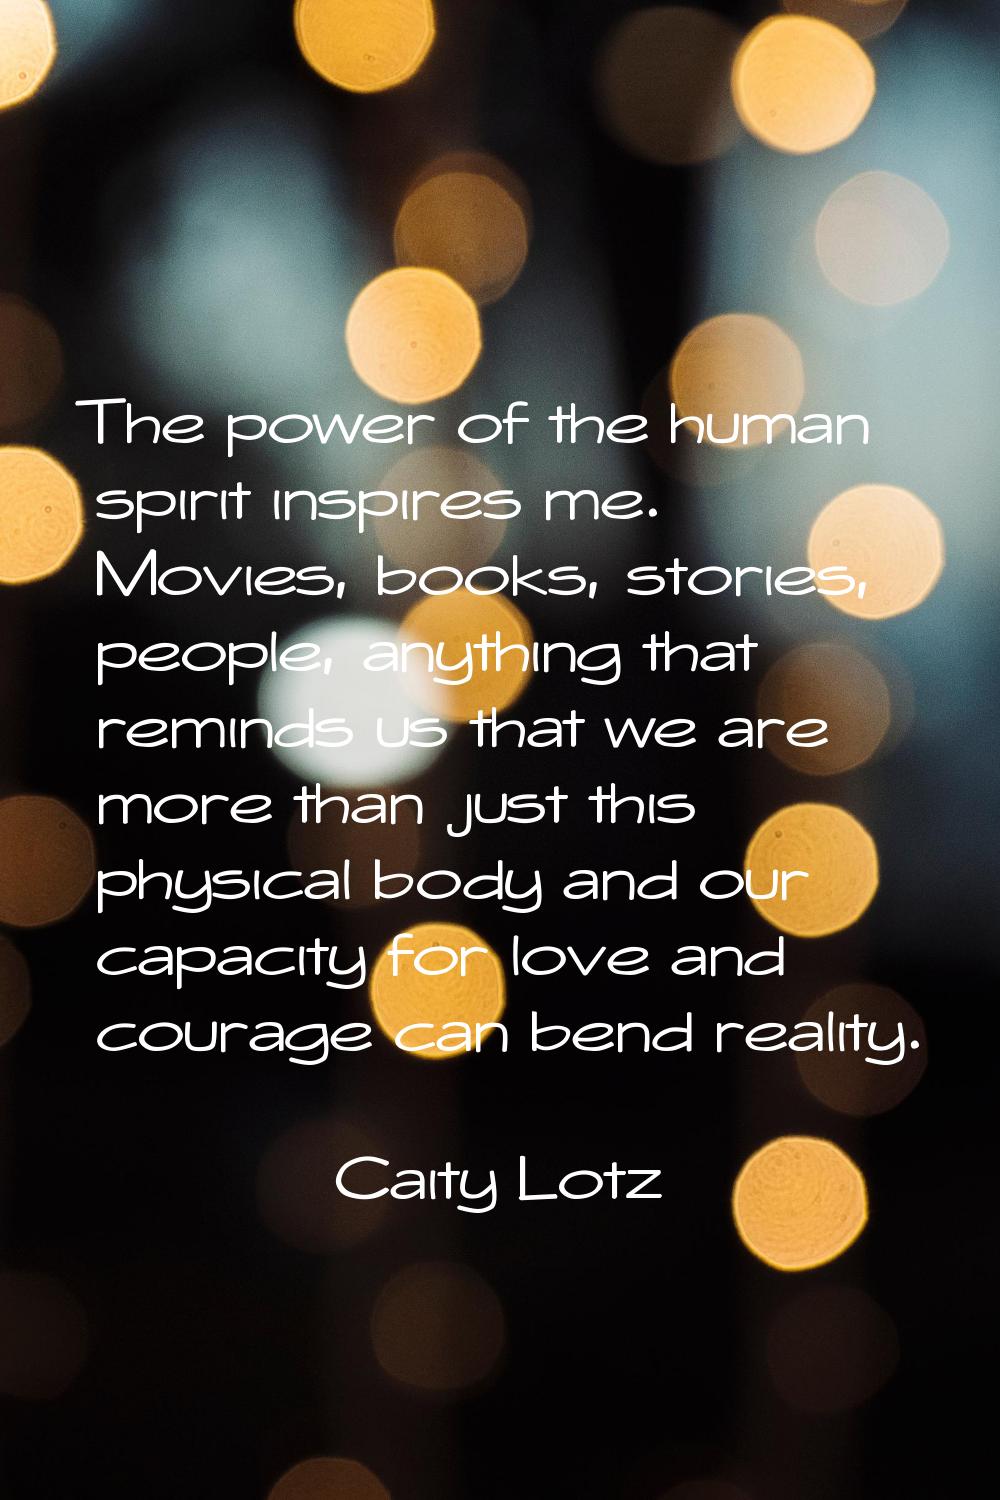 The power of the human spirit inspires me. Movies, books, stories, people, anything that reminds us